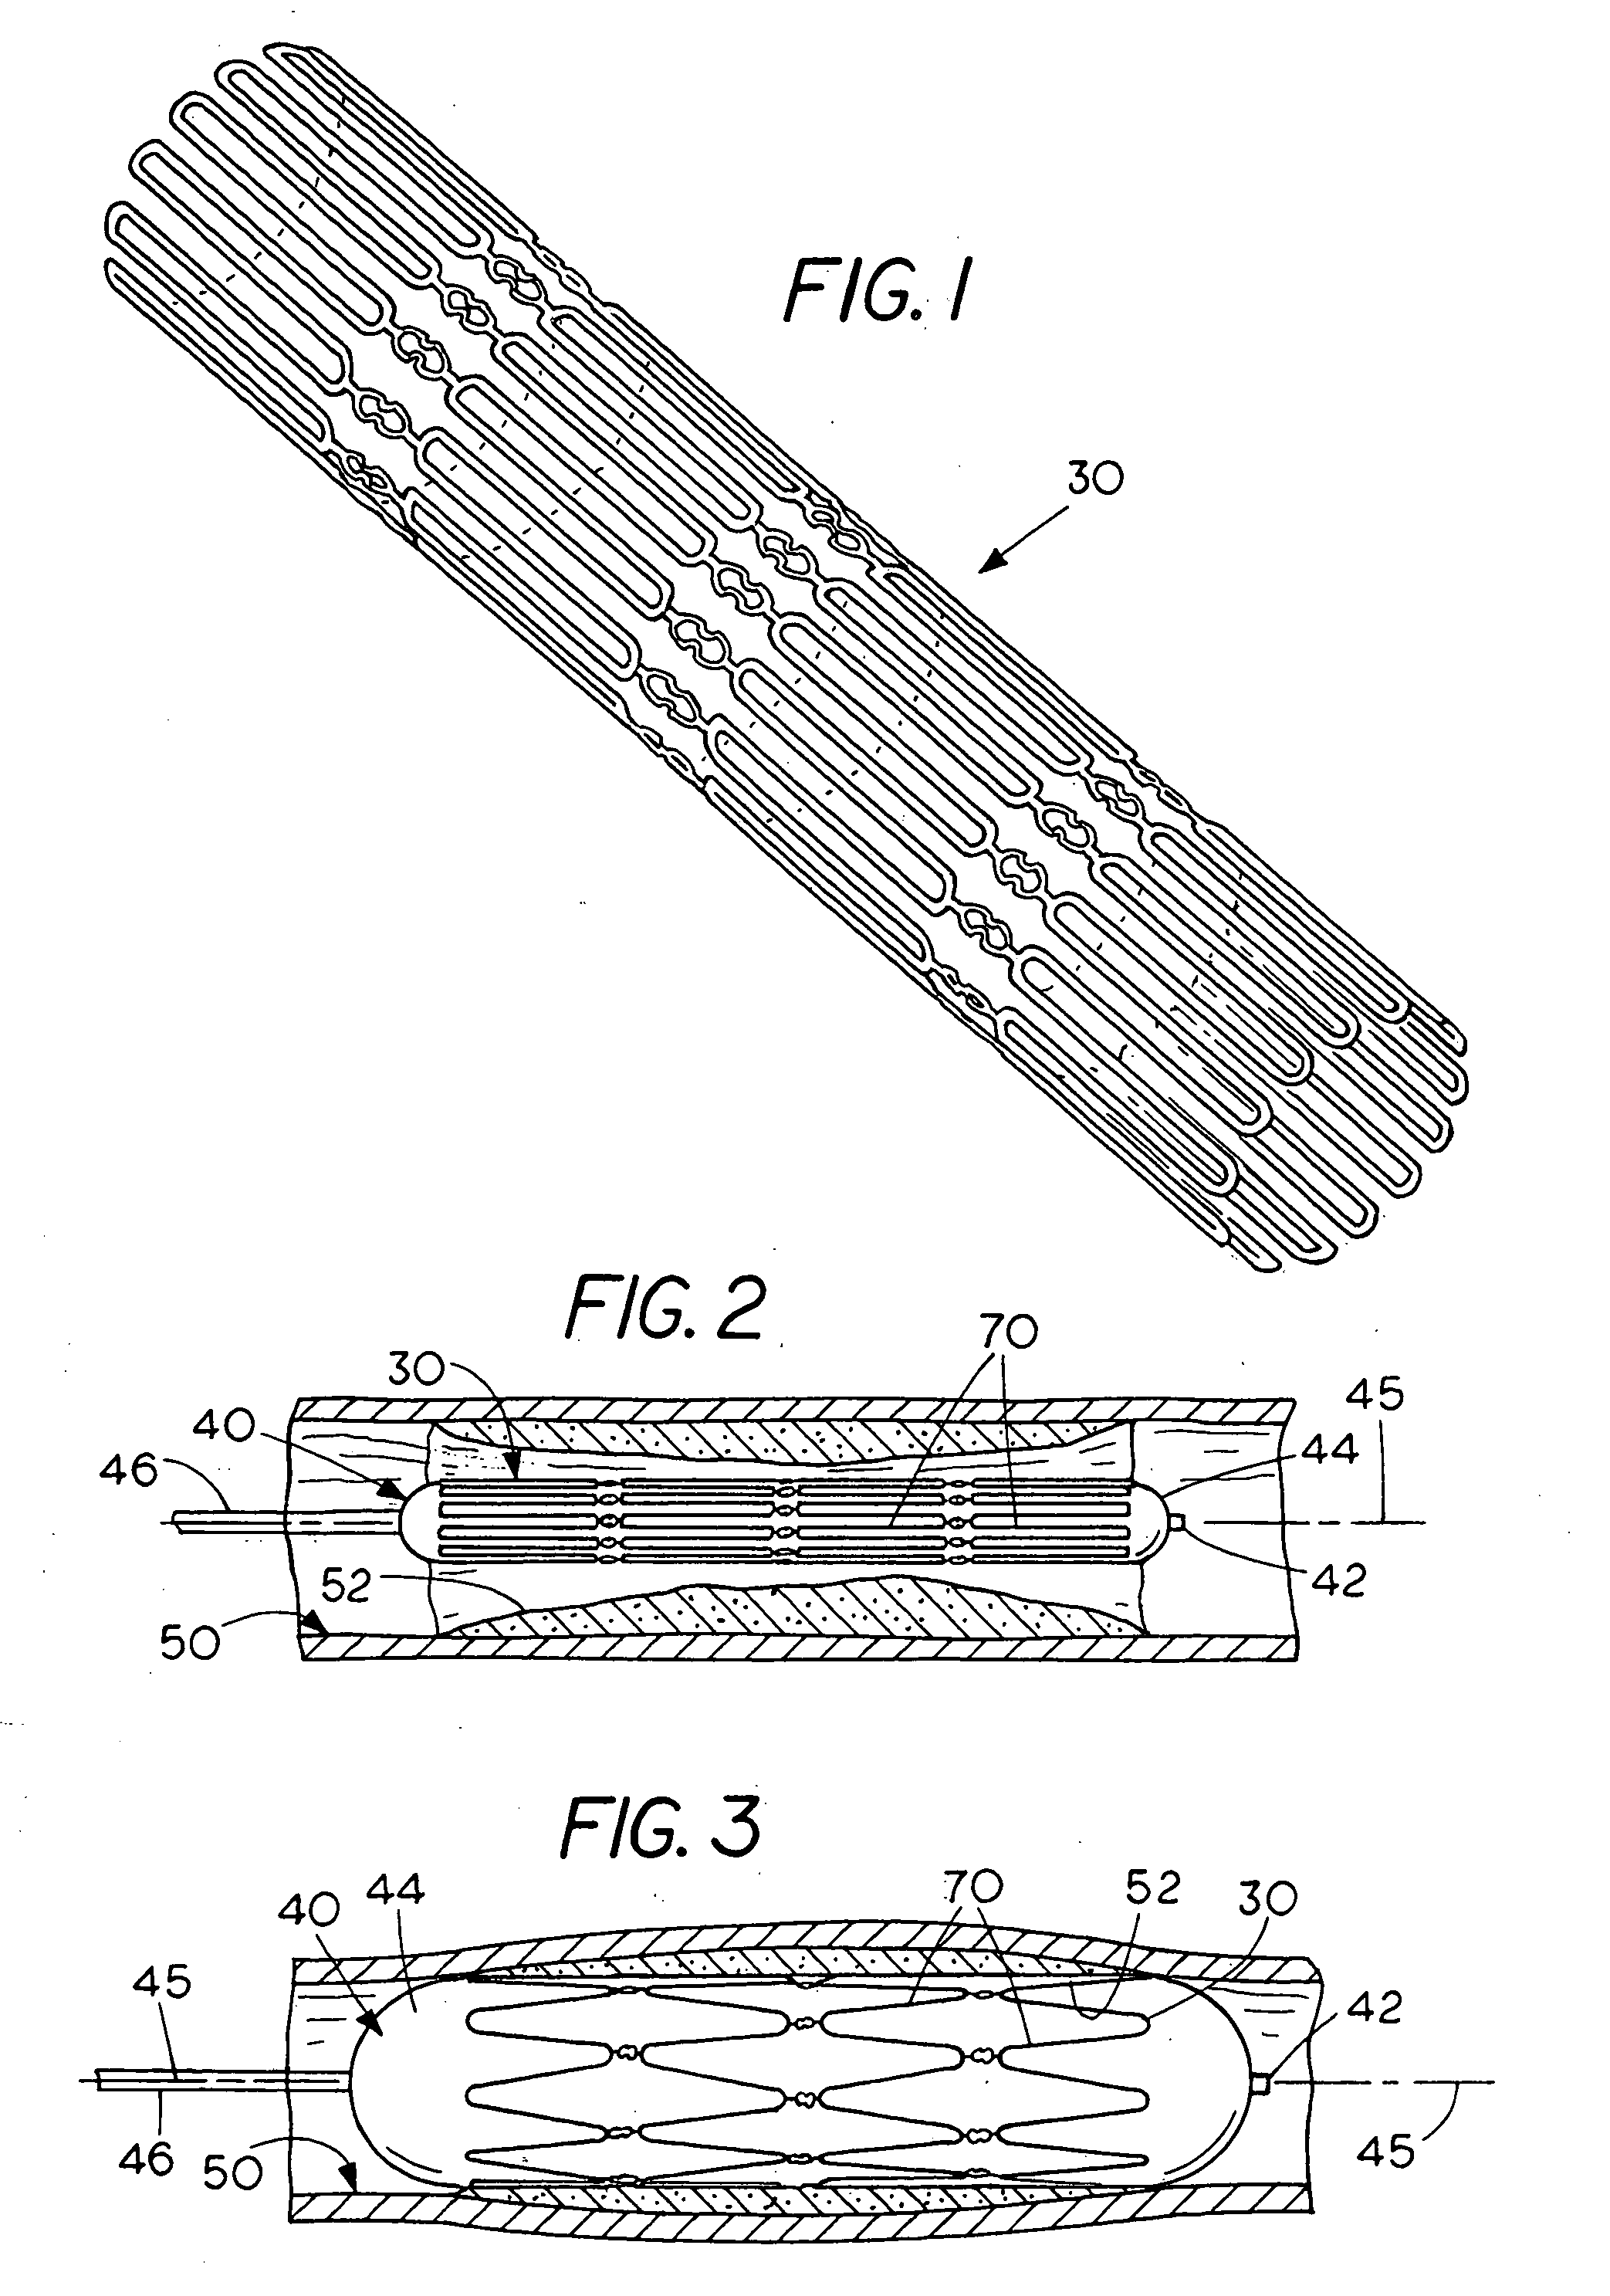 Flexible cells for interconnecting stent components